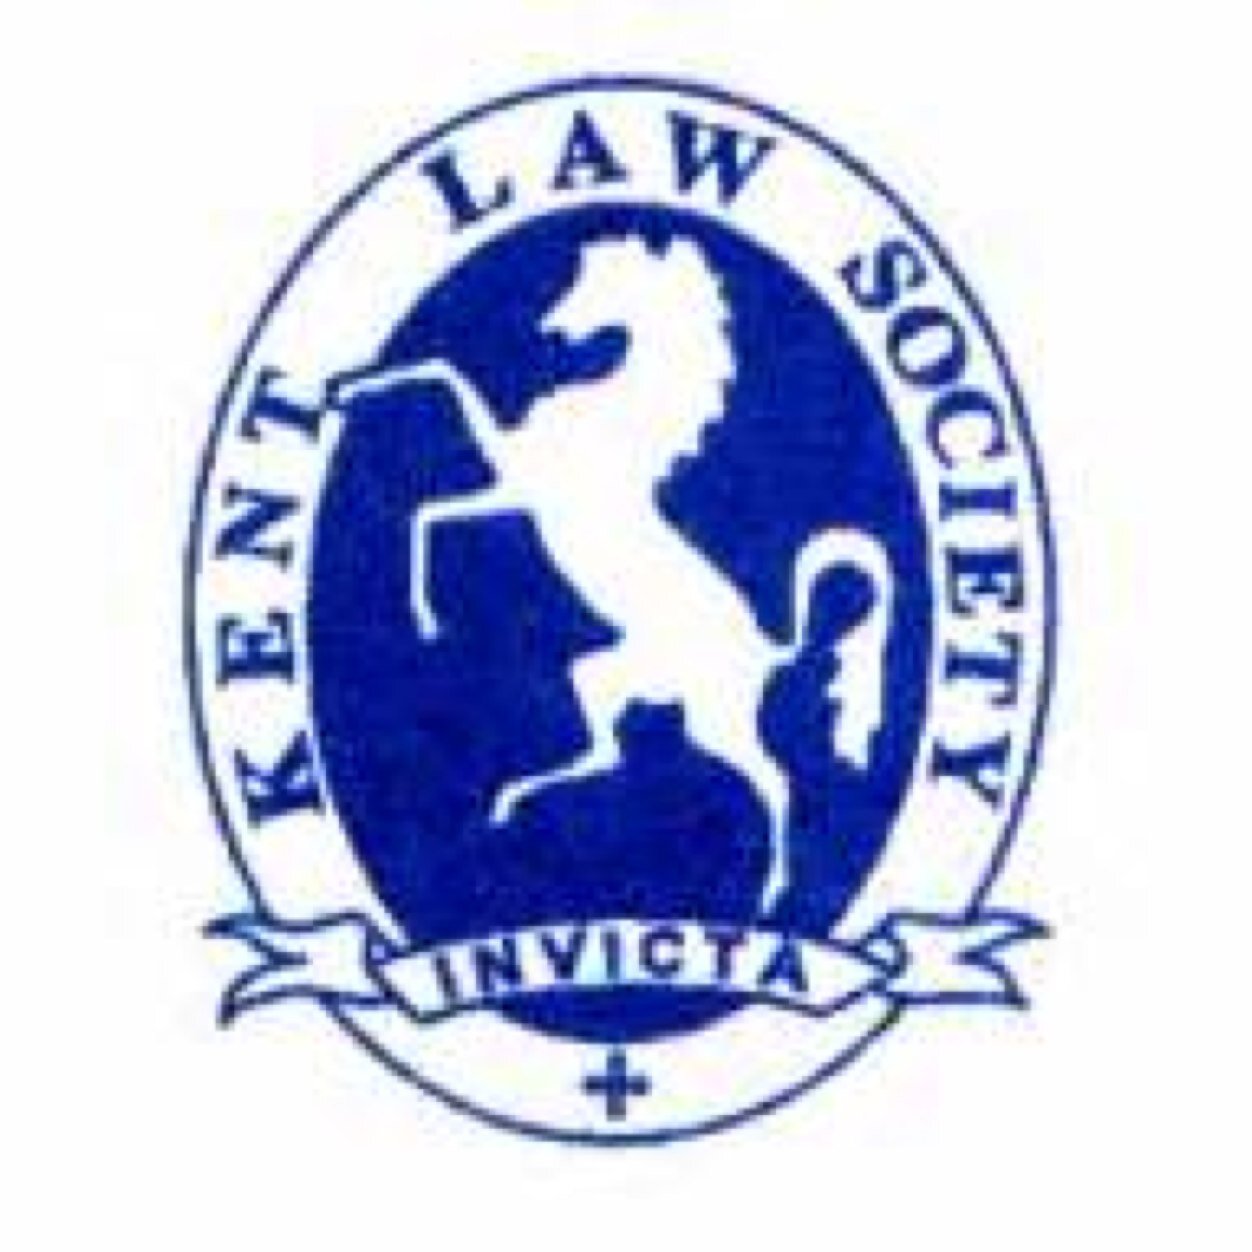 The Kent Law Society provides its members with training, marketing, recruitment, guidance, networking and social interaction.